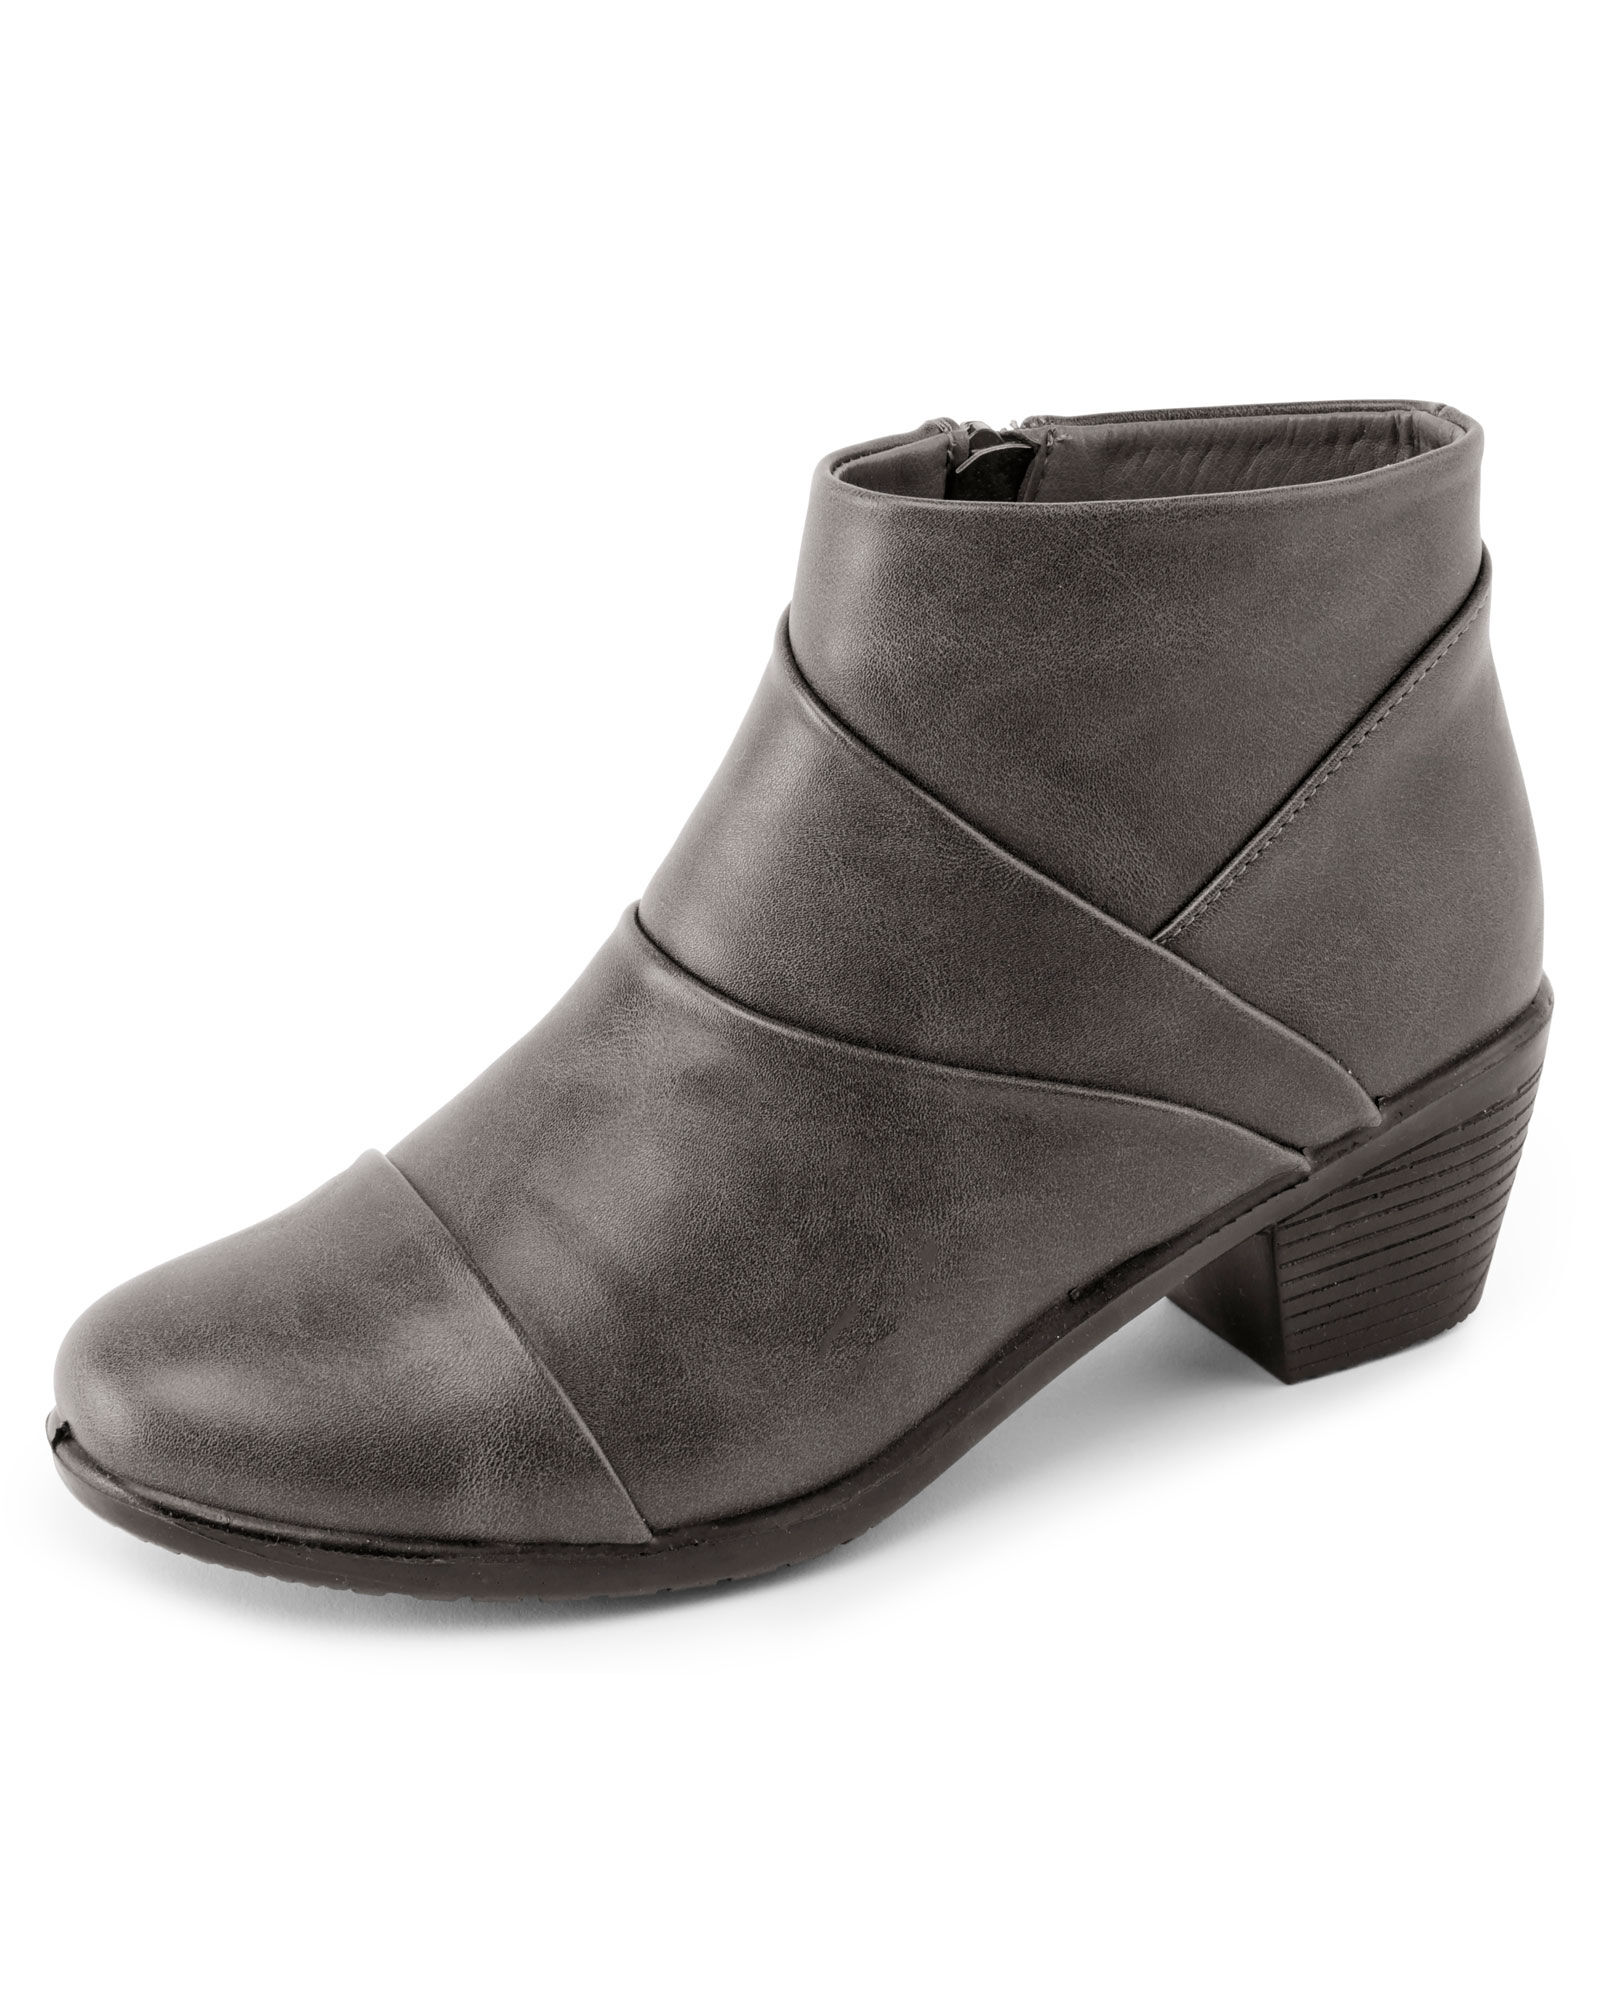 cotton traders ladies boots